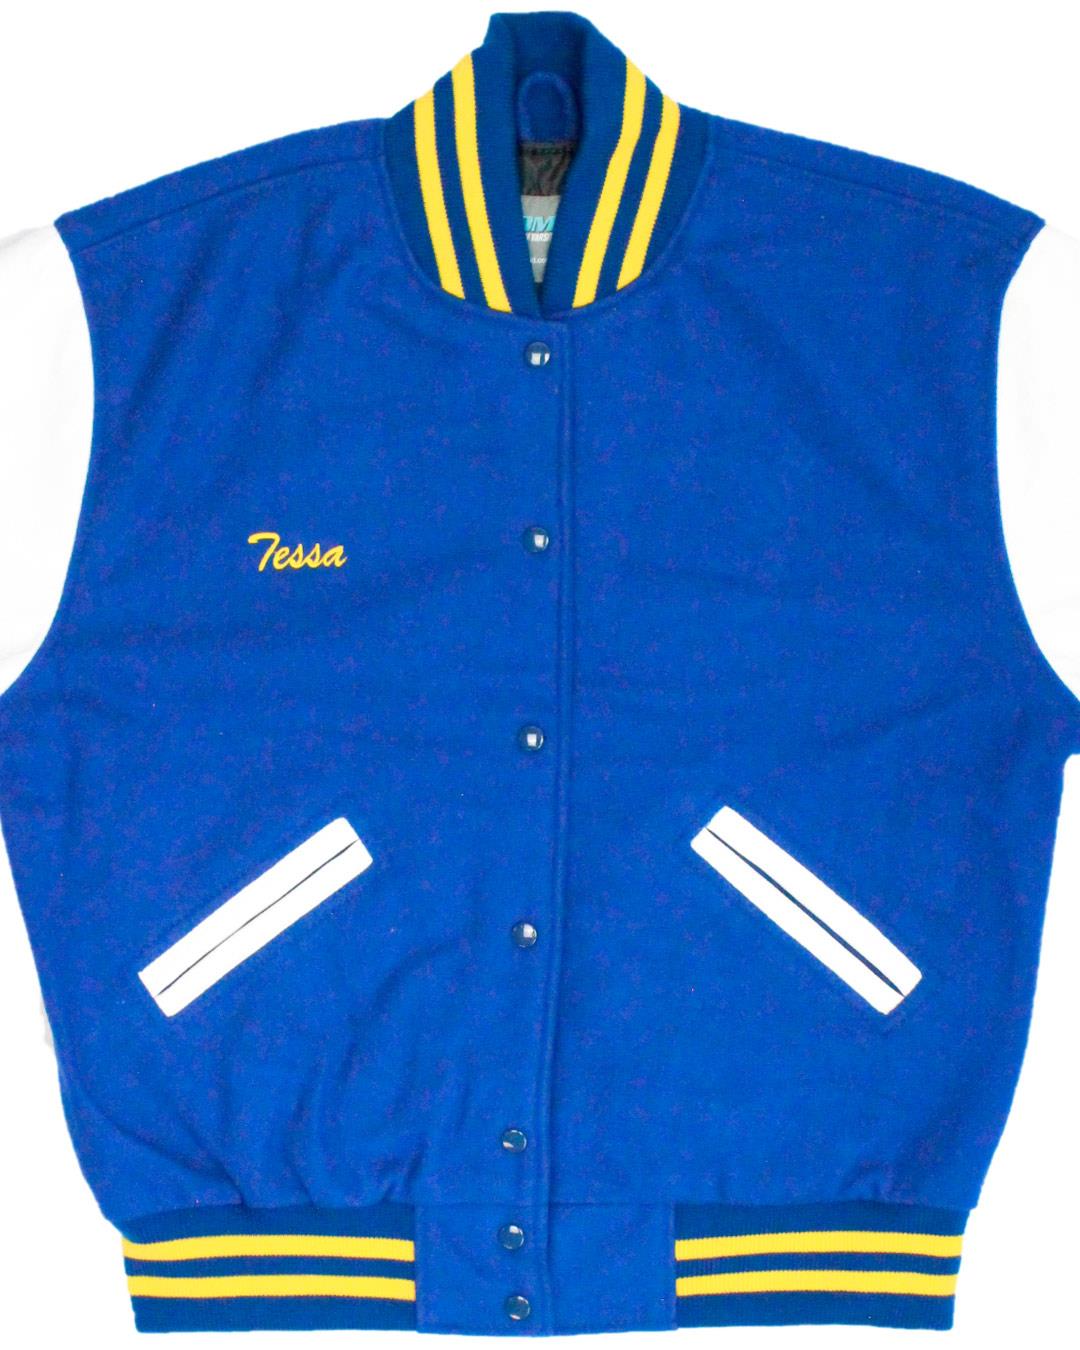 Fountain Valley High School Barons Letter Jacket, Fountain Valley, CA - Front